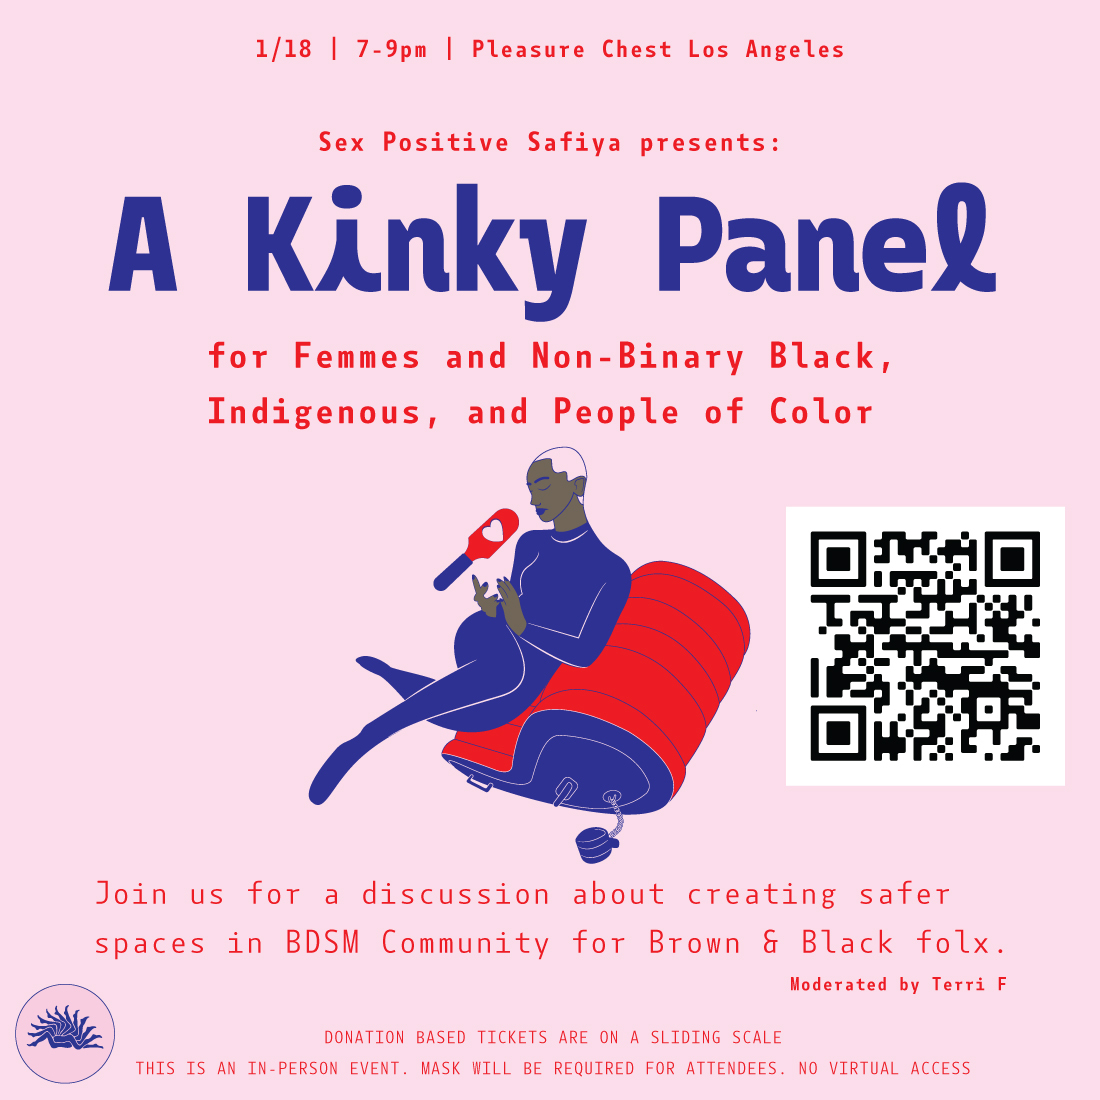 Kinky Panel Discussion About Creating Safer Spaces in BDSM Community for BIPOC